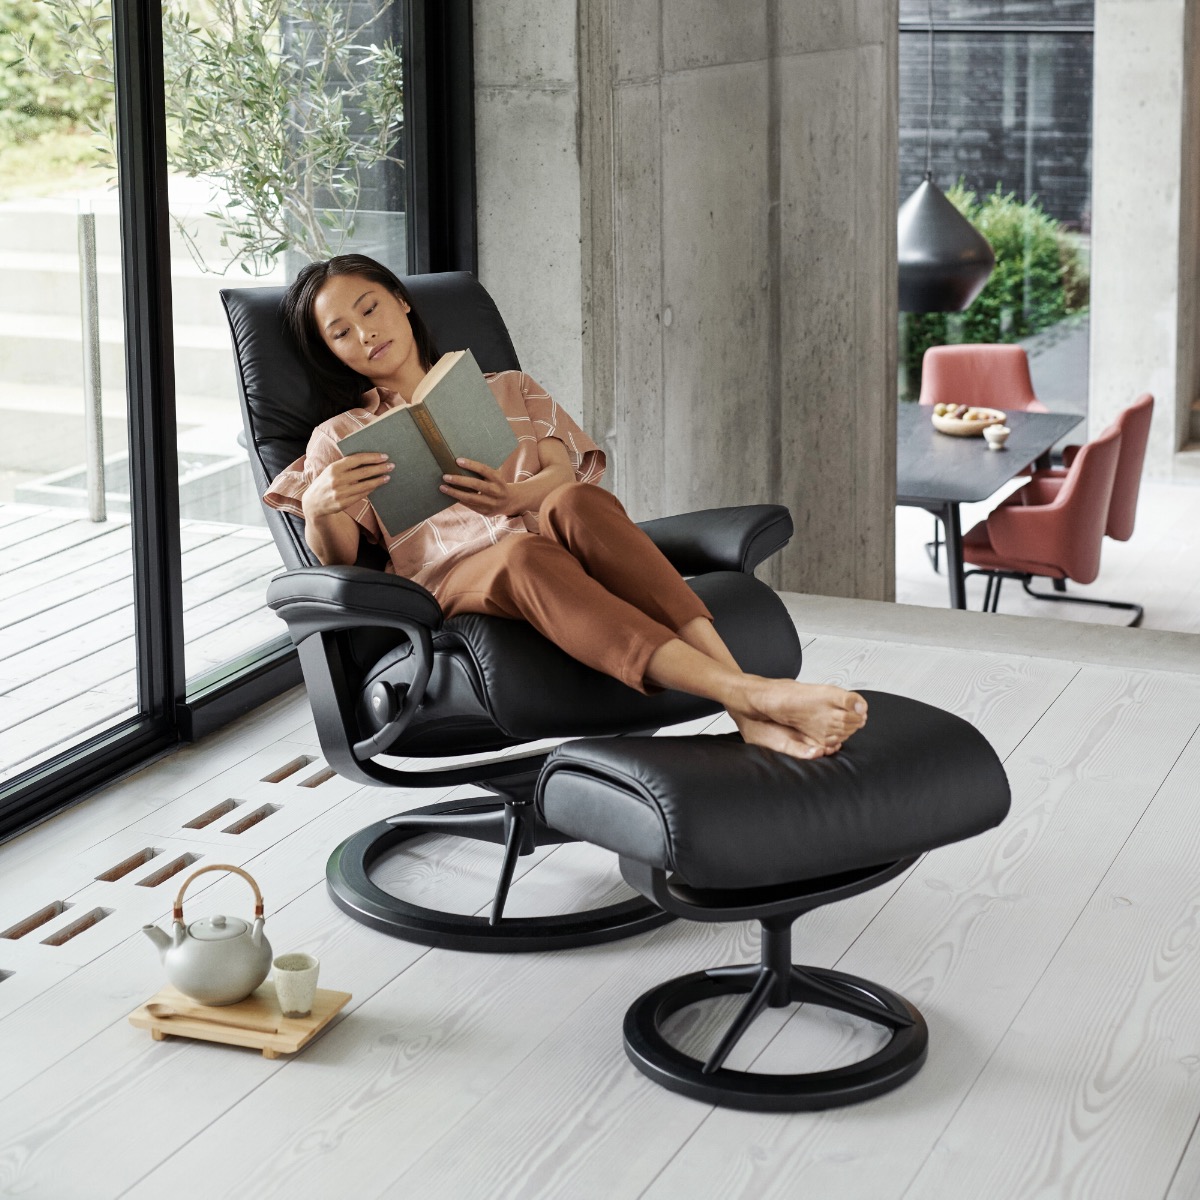 Stressless - Made in Norway